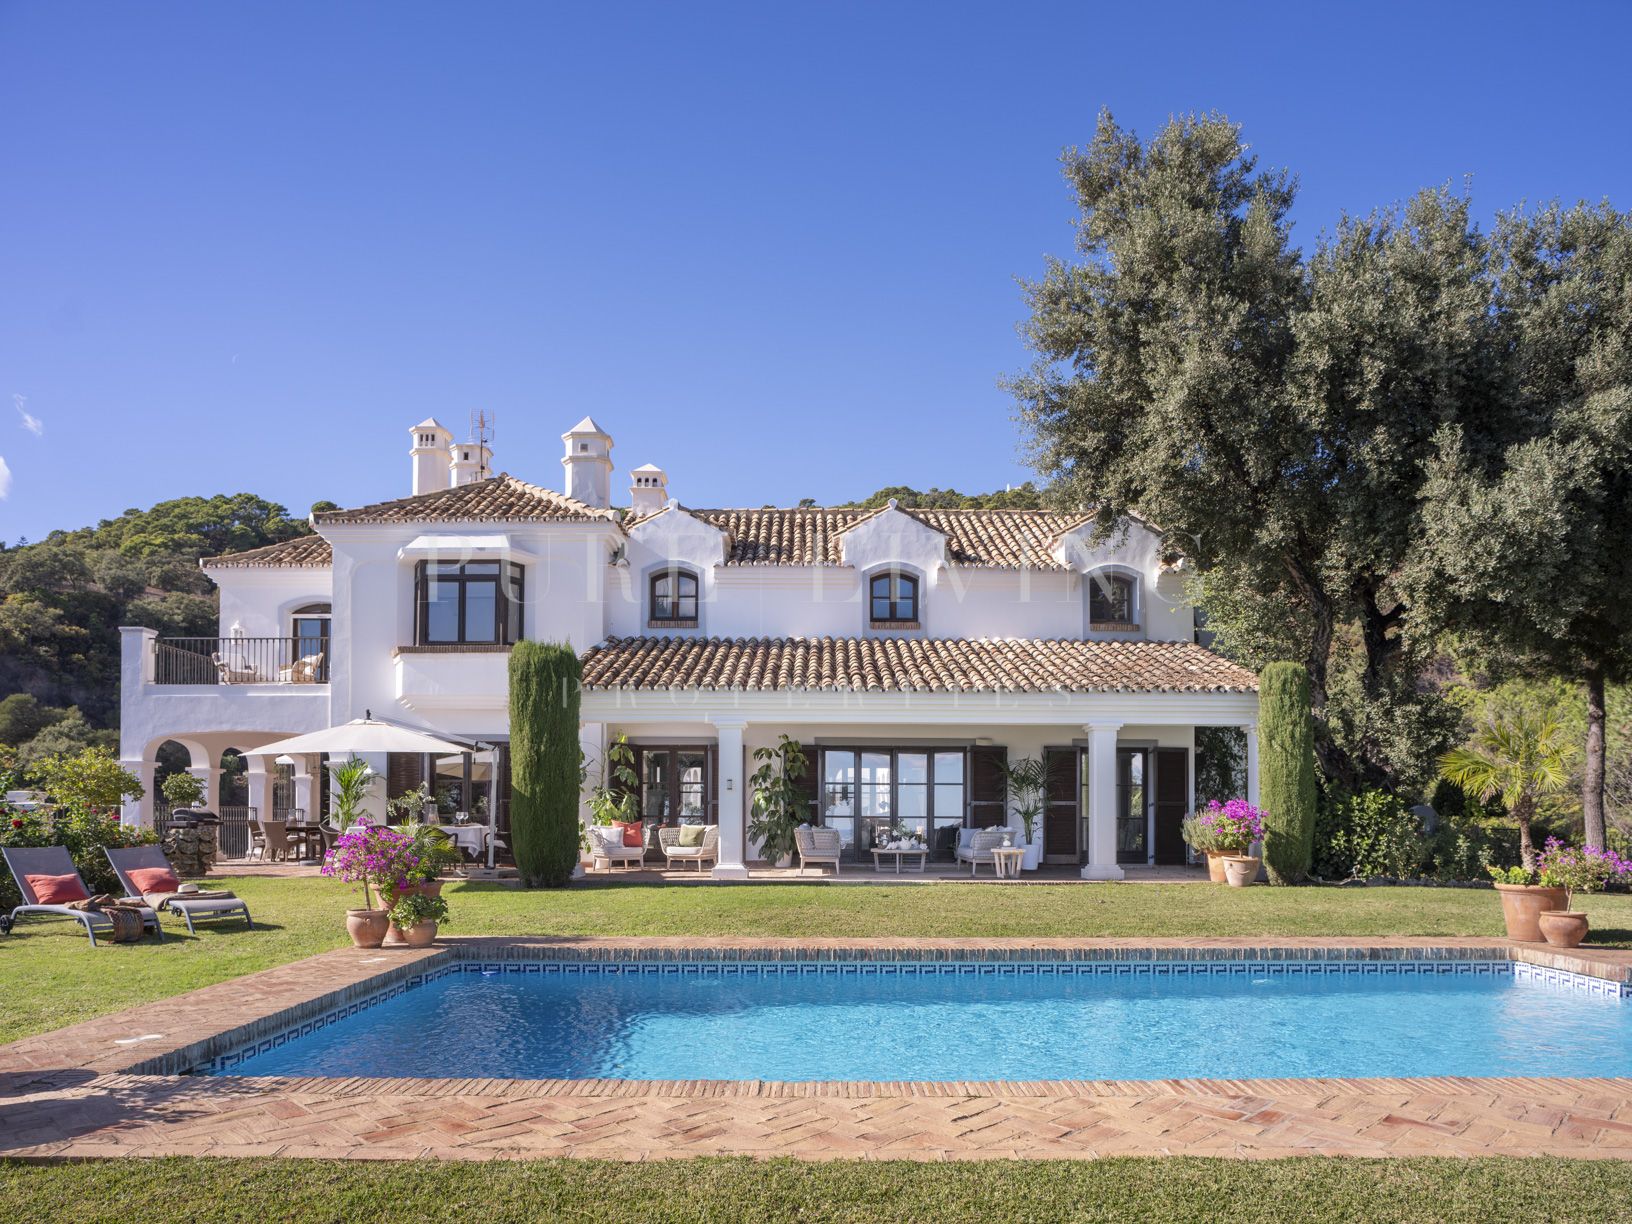 Magnificent villa with incredible panoramic views located in the privileged area of El Madroñal, Benahavís